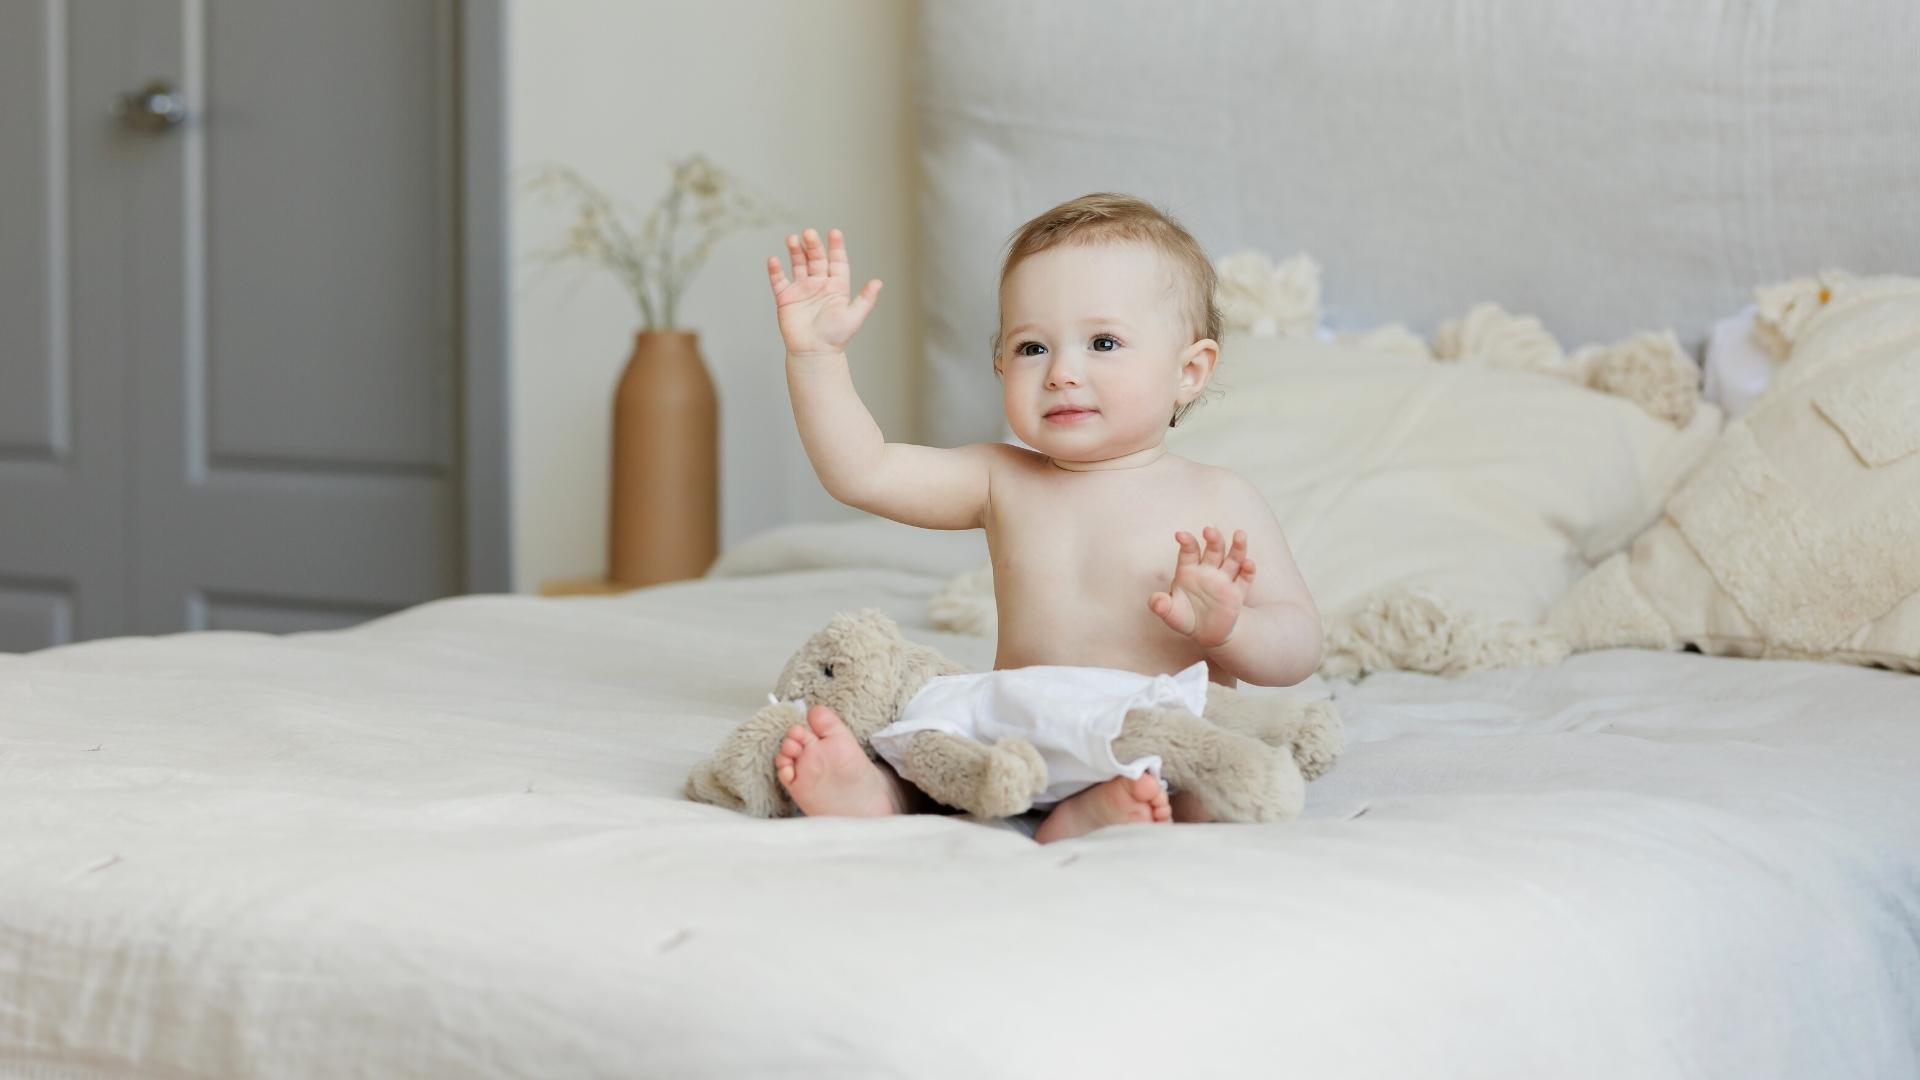 When Do Babies Sit Up From Lying Down? 6 Tips To Try Today